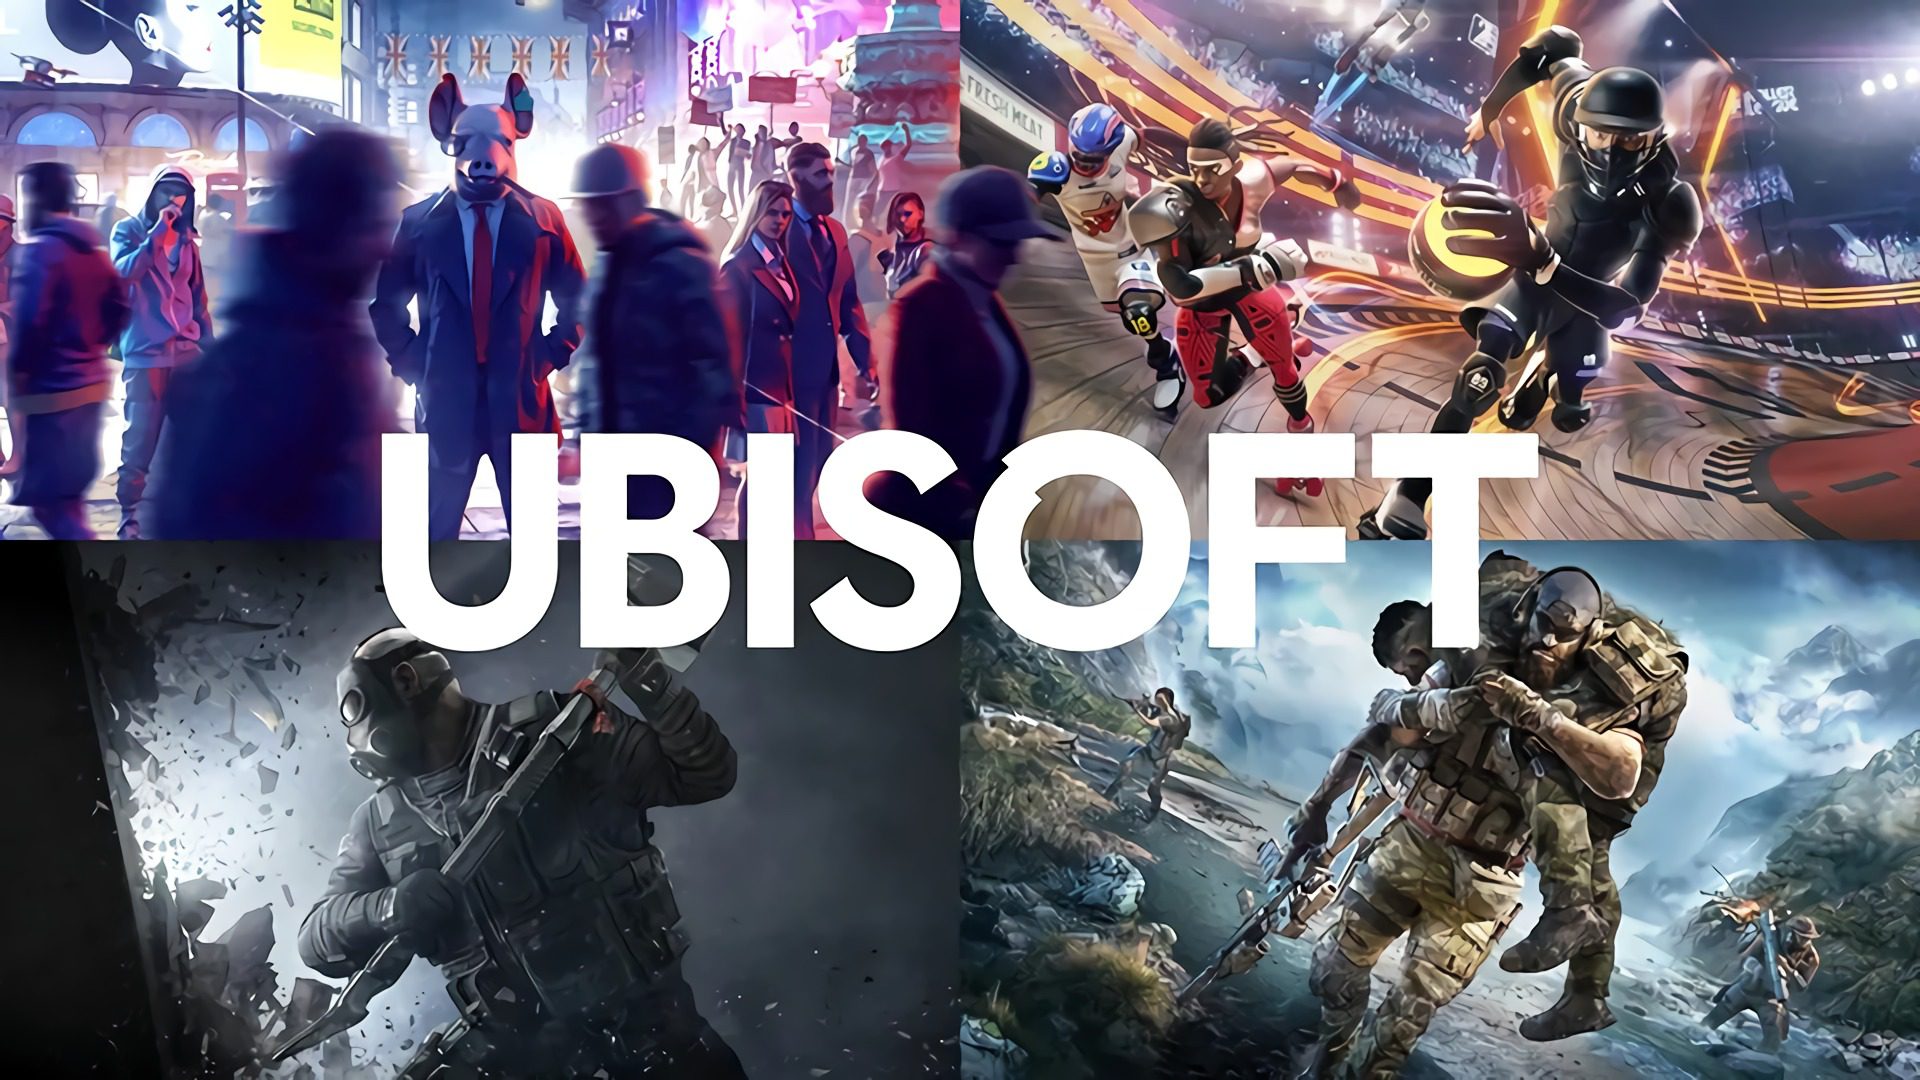 Tomorrow all these Ubisoft game servers are closed